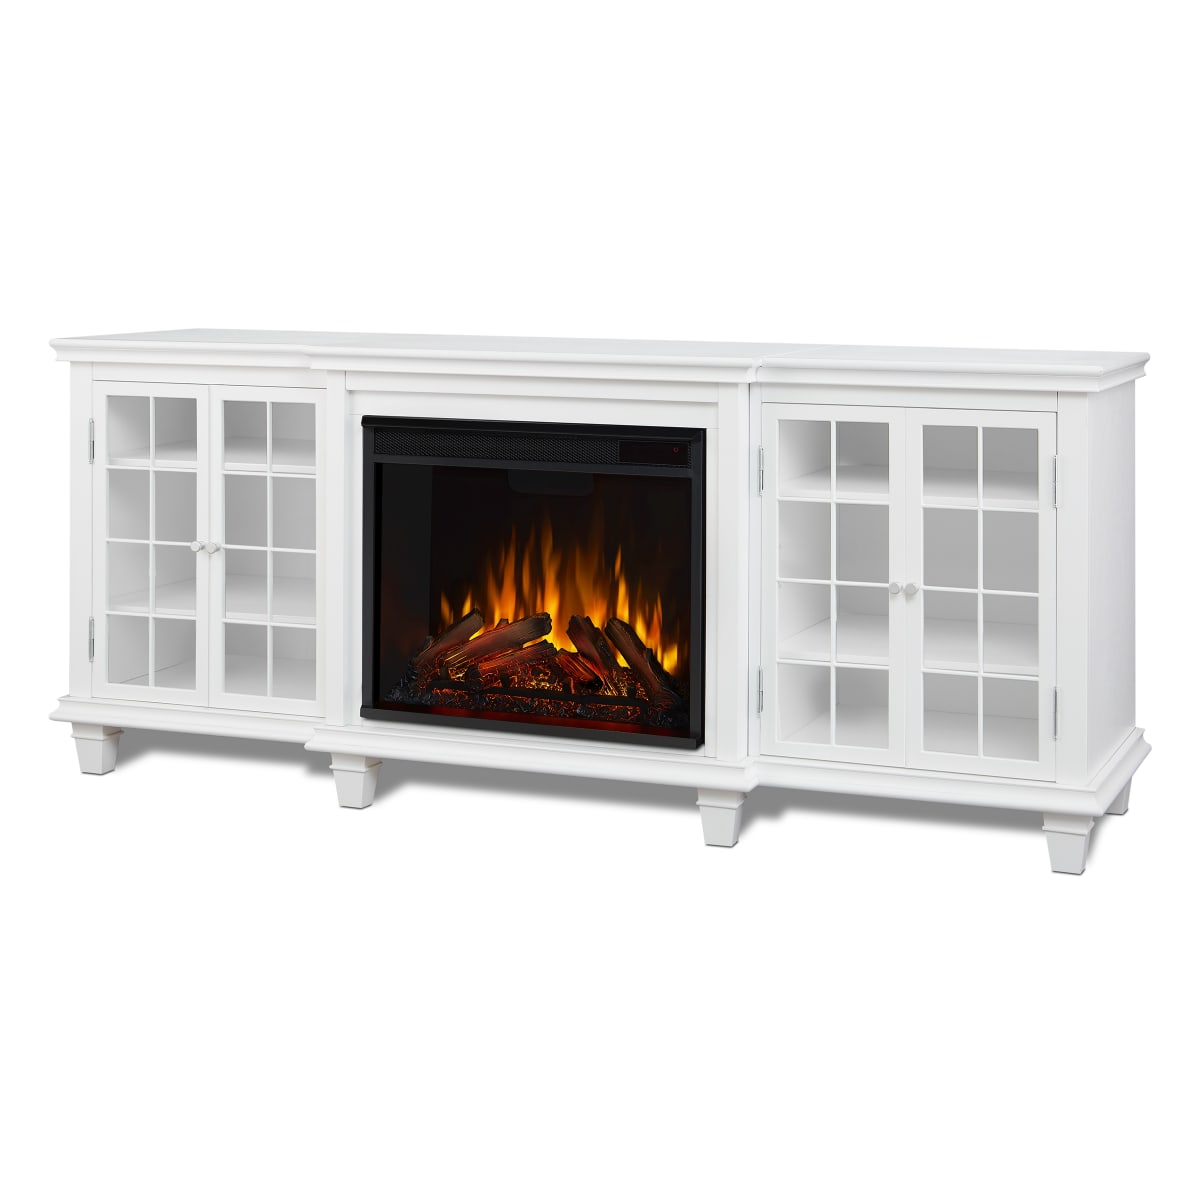 Electric Fireplace With Remote Control, 70 Inch Wide Electric Fireplace